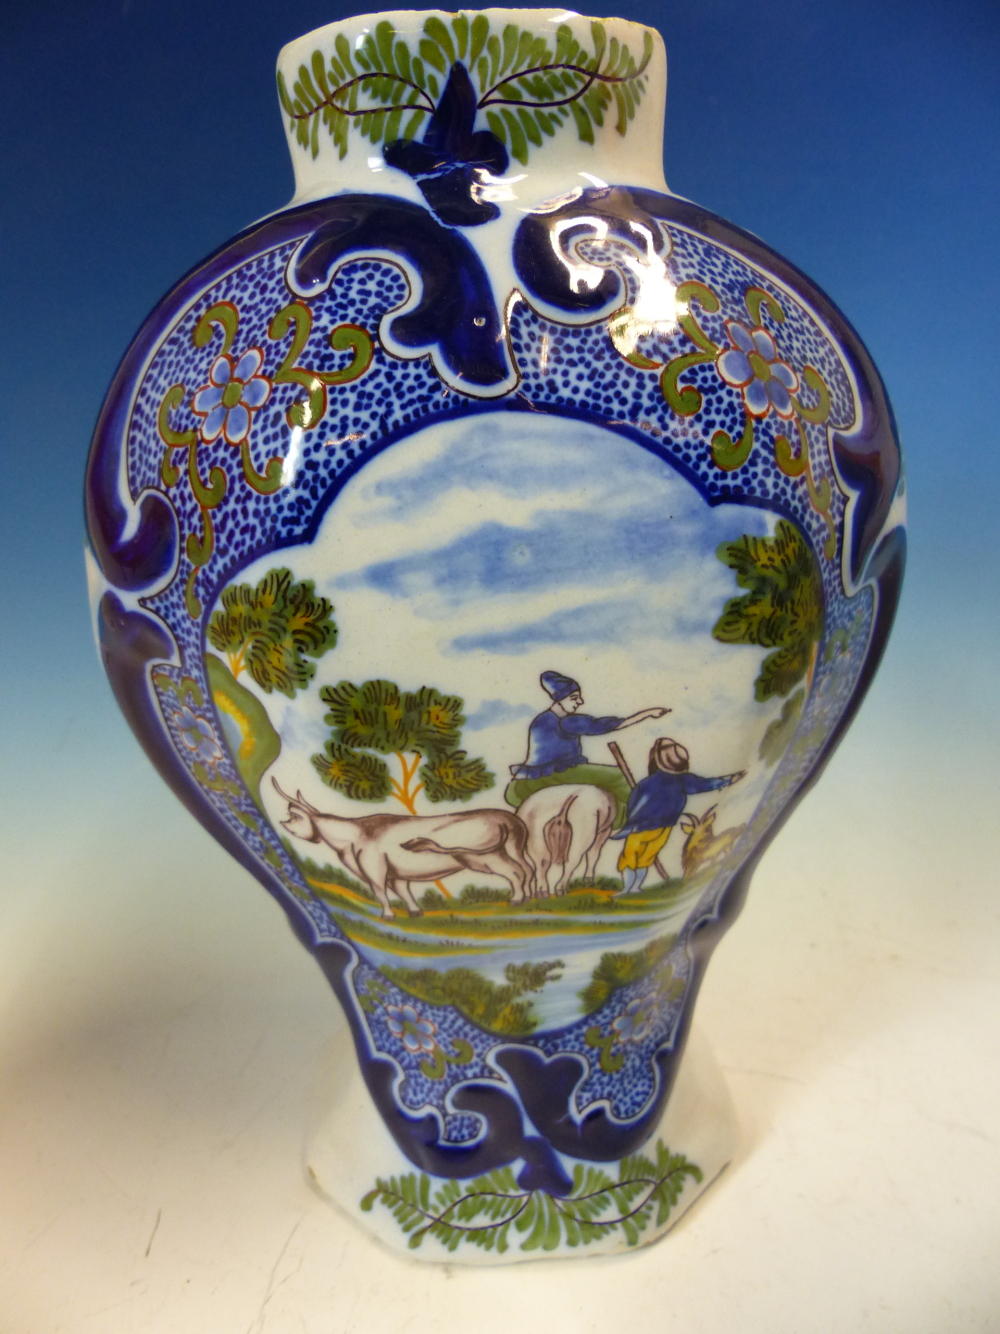 TWO 19th C. DUTCH DELFT POLYCHROME VASES AND COVERS OF FLATTENED BALUSTER SHAPE, ONE PAINTED WITH - Image 5 of 14